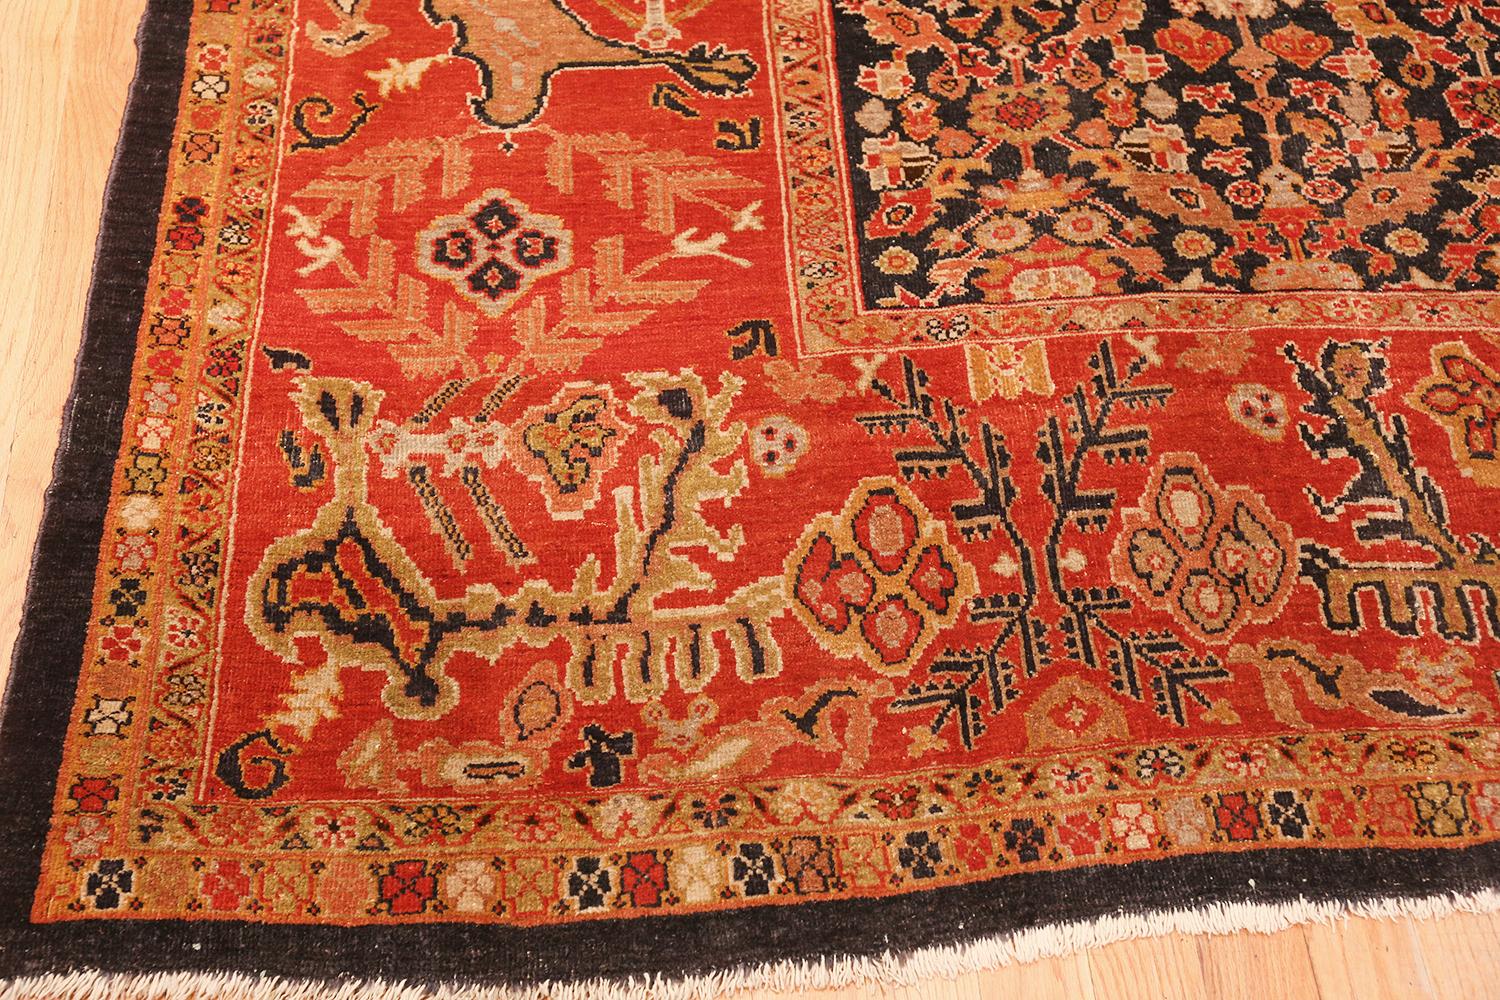 Antique Persian Sultanabad Rug. Size: 10 ft 2 in x 13 ft 2 in (3.1 m x 4.01 m) (Handgeknüpft)